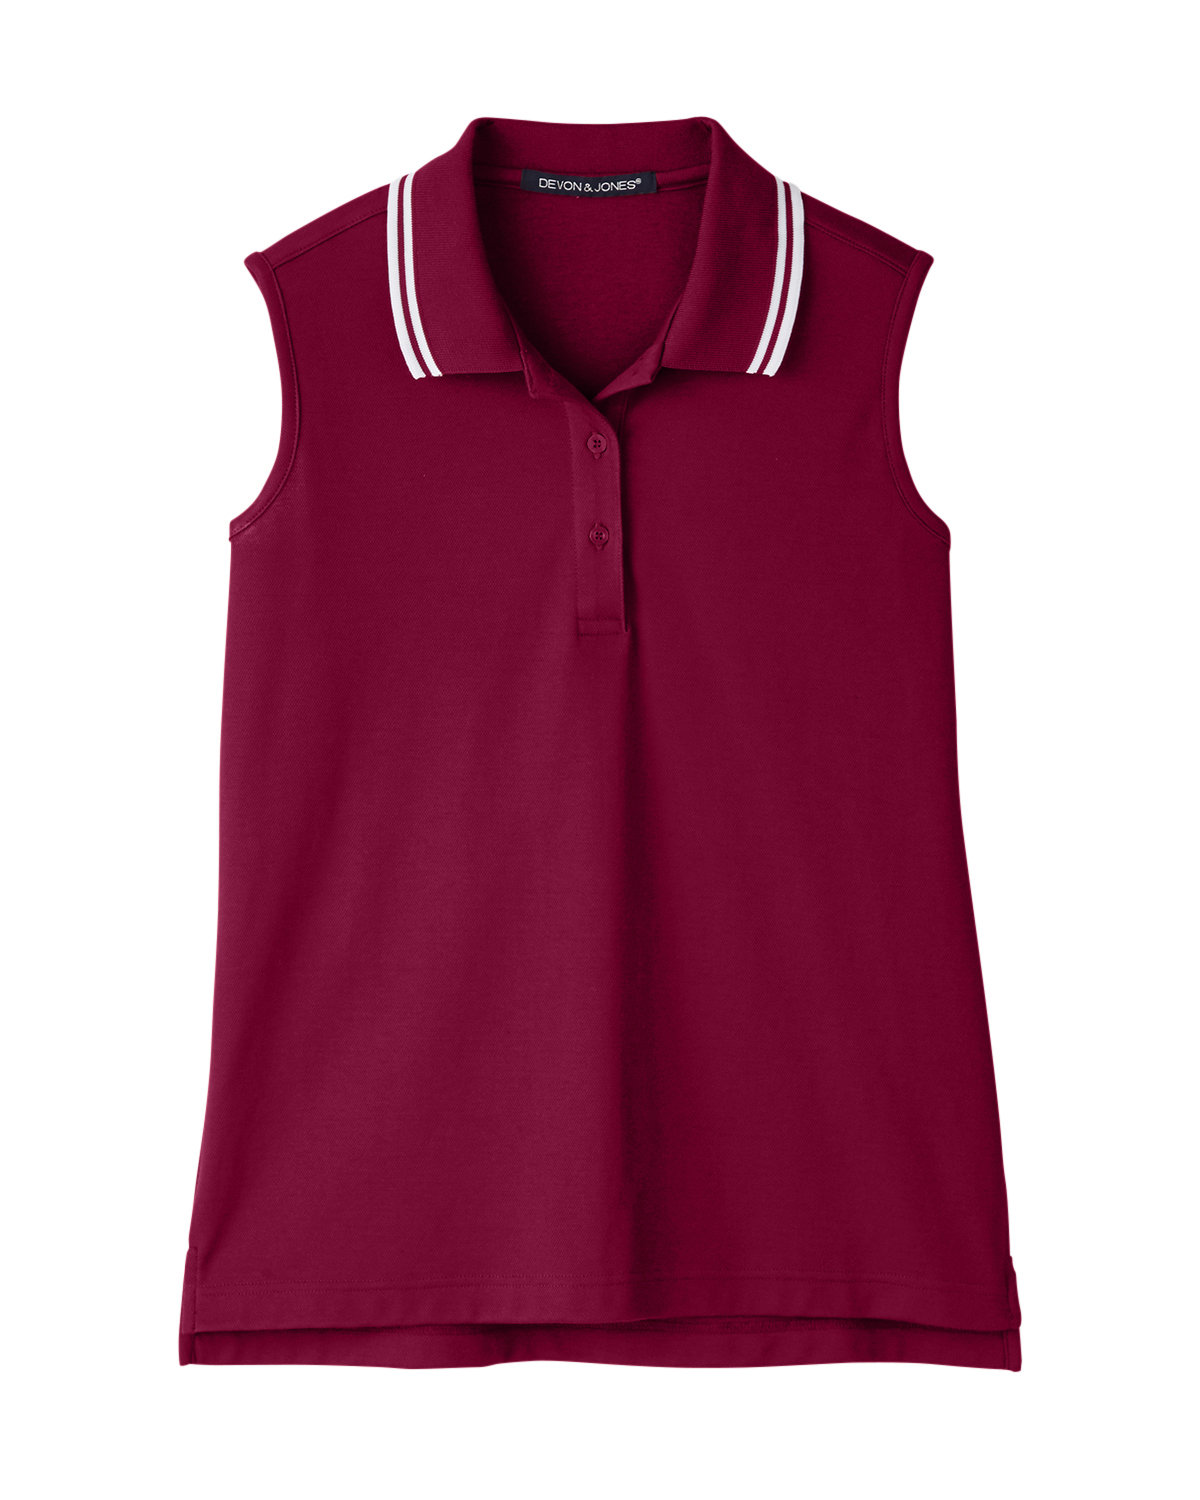 click to view BURGUNDY/ WHITE